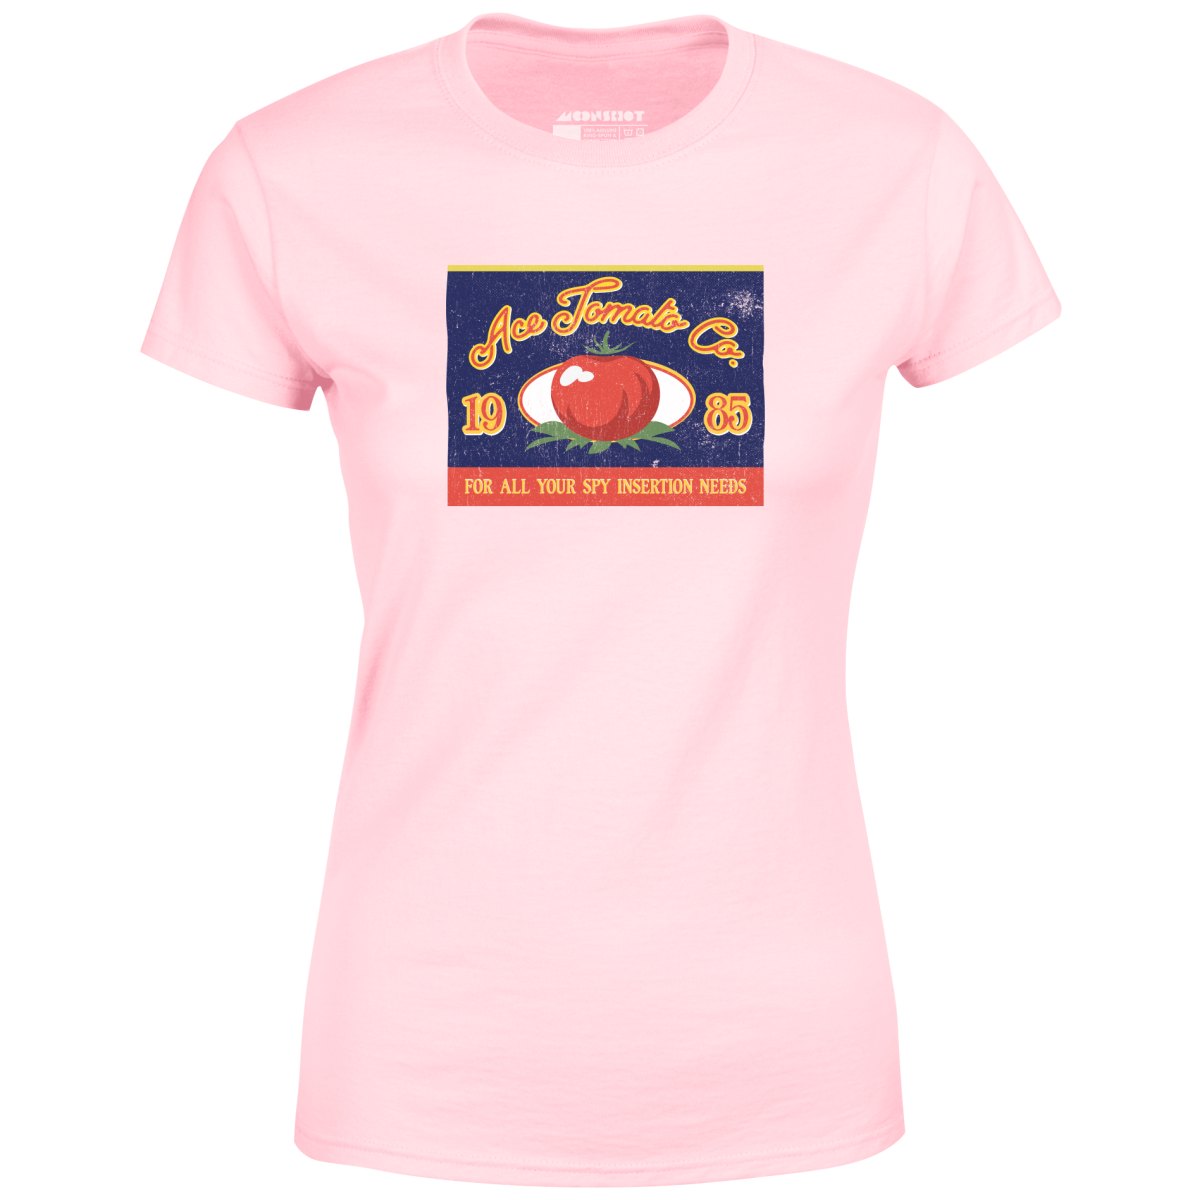 Ace Tomato Co. Spies Like Us - Women's T-Shirt